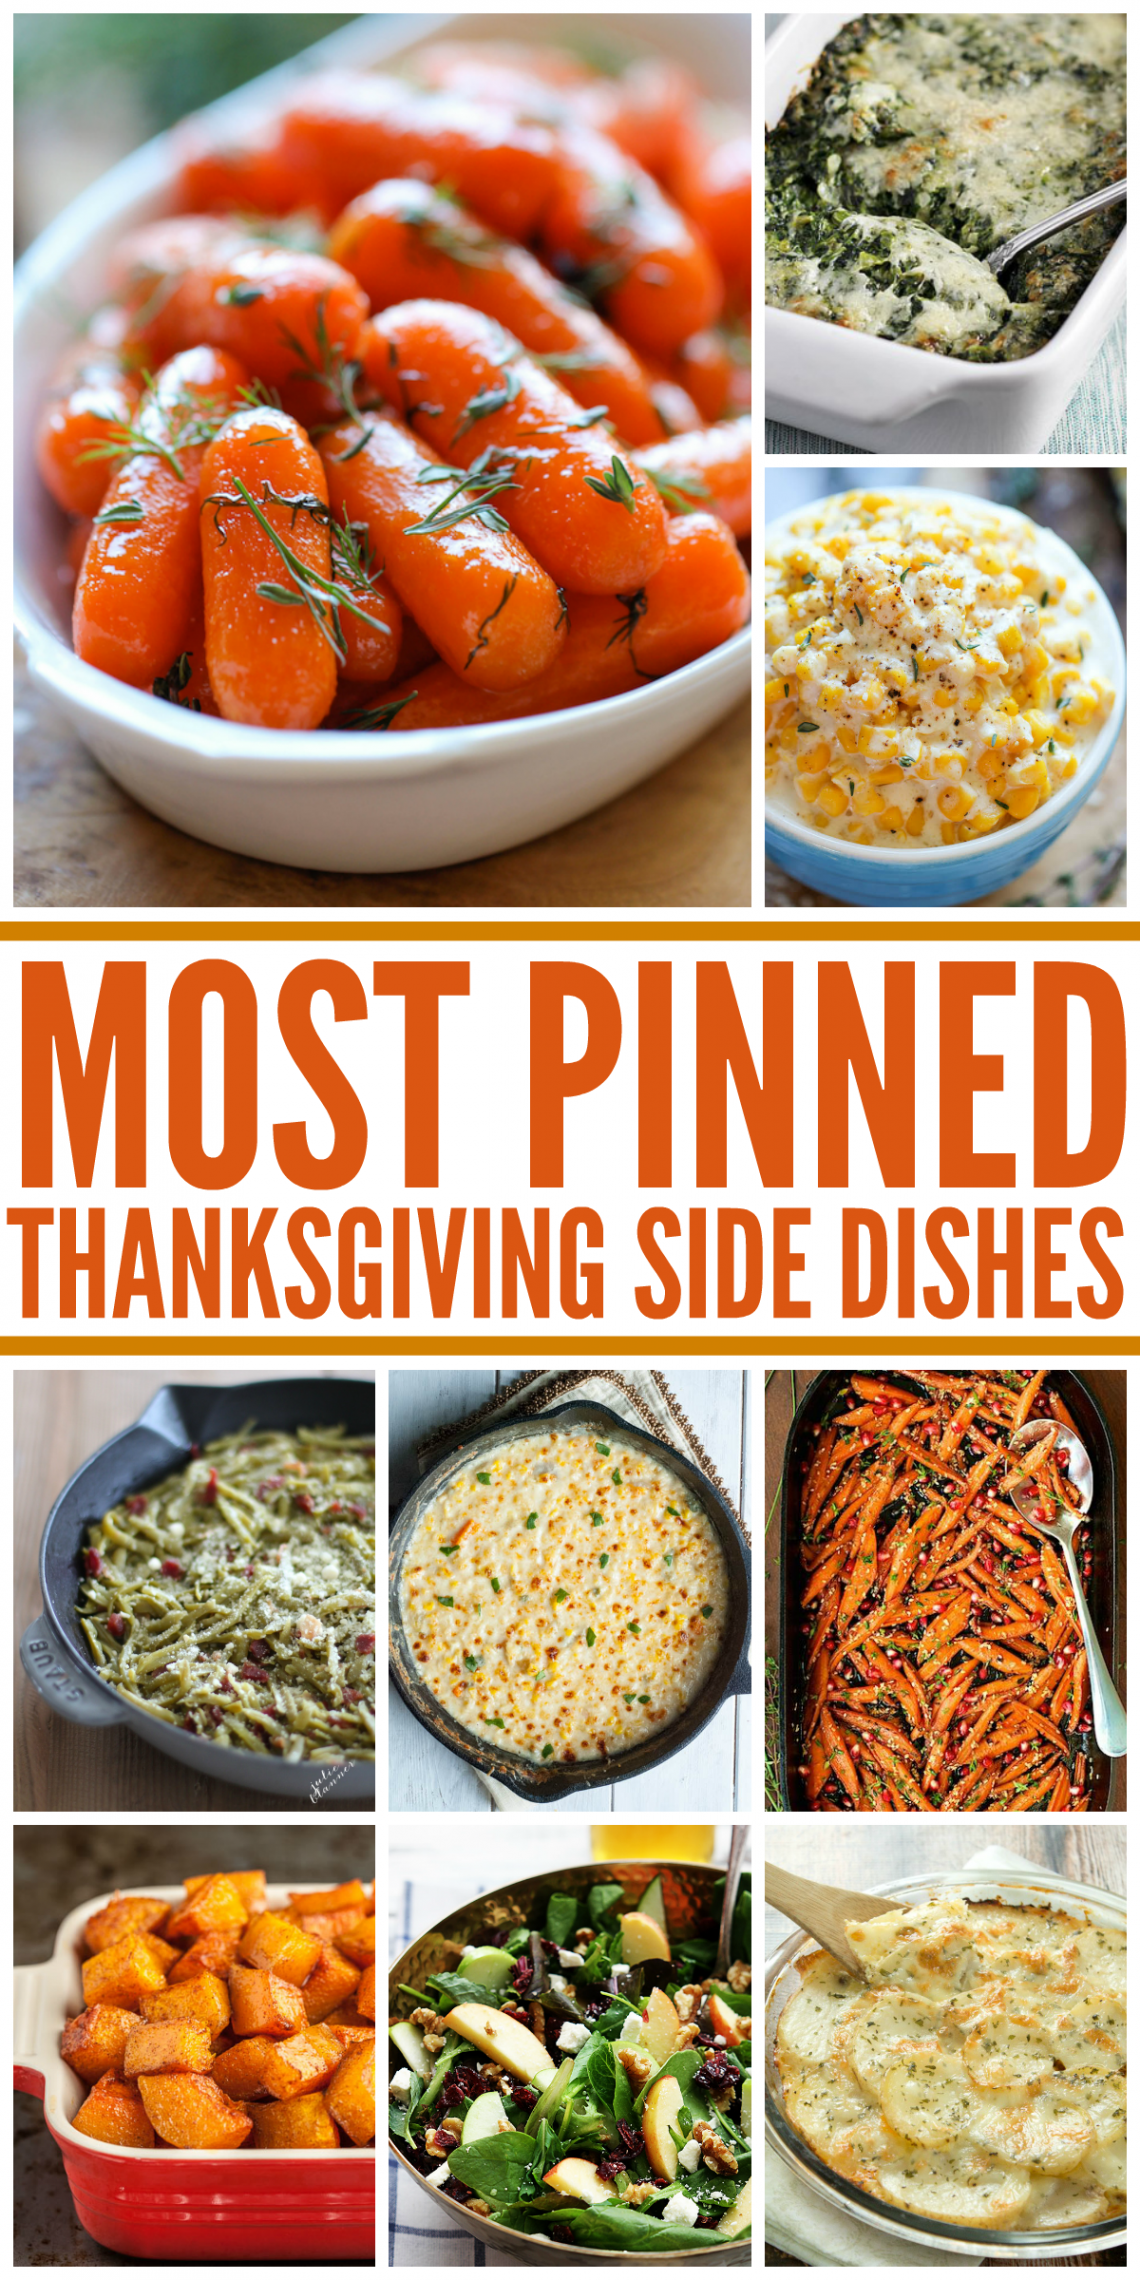 Most Pinned Holiday Side Dishes  Making Lemonade